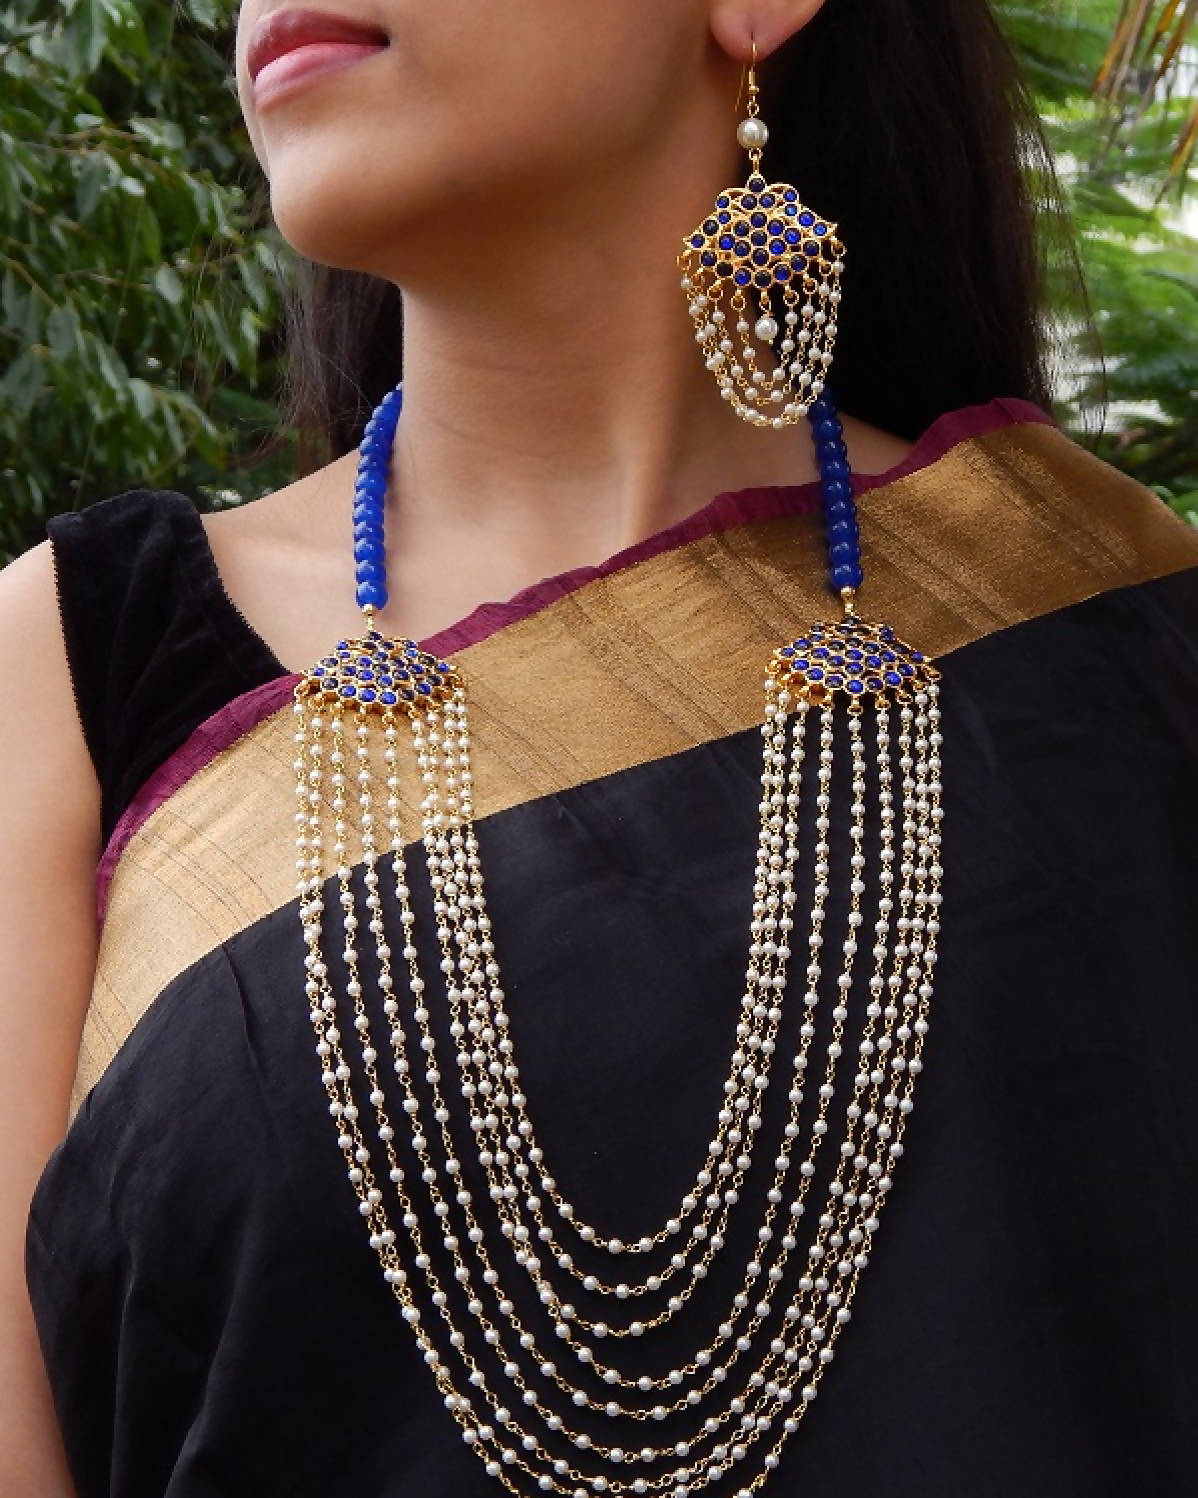 Designer Handmade Nine layer white pearl chain Blue Kemp pendant with Blue Agate beads Necklace Set by Nishna Designs